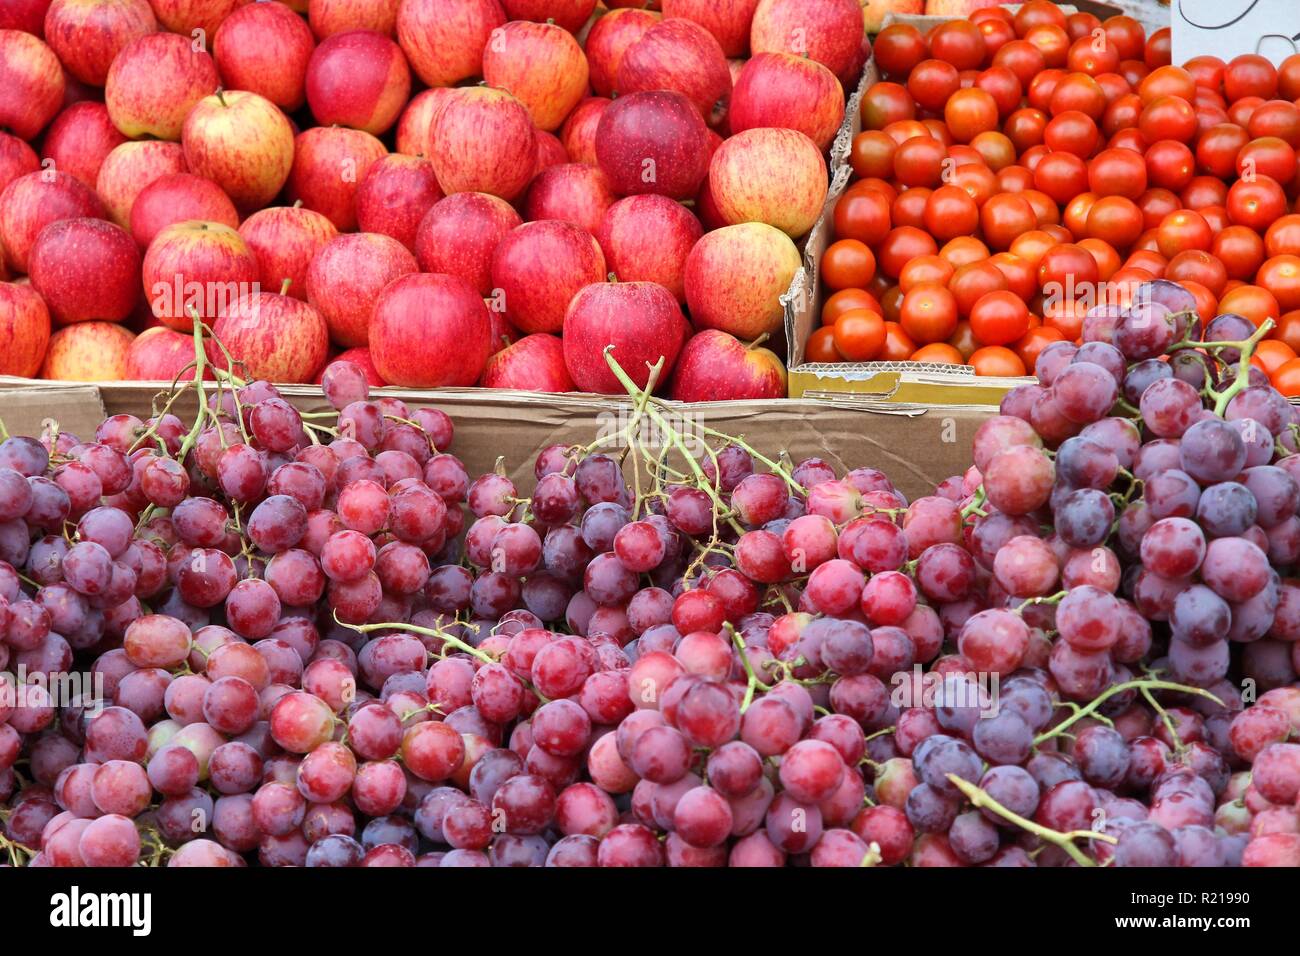 Apples, tomatoes and red grapes at a marketplace in United Kingdom. Farmers market. Stock Photo